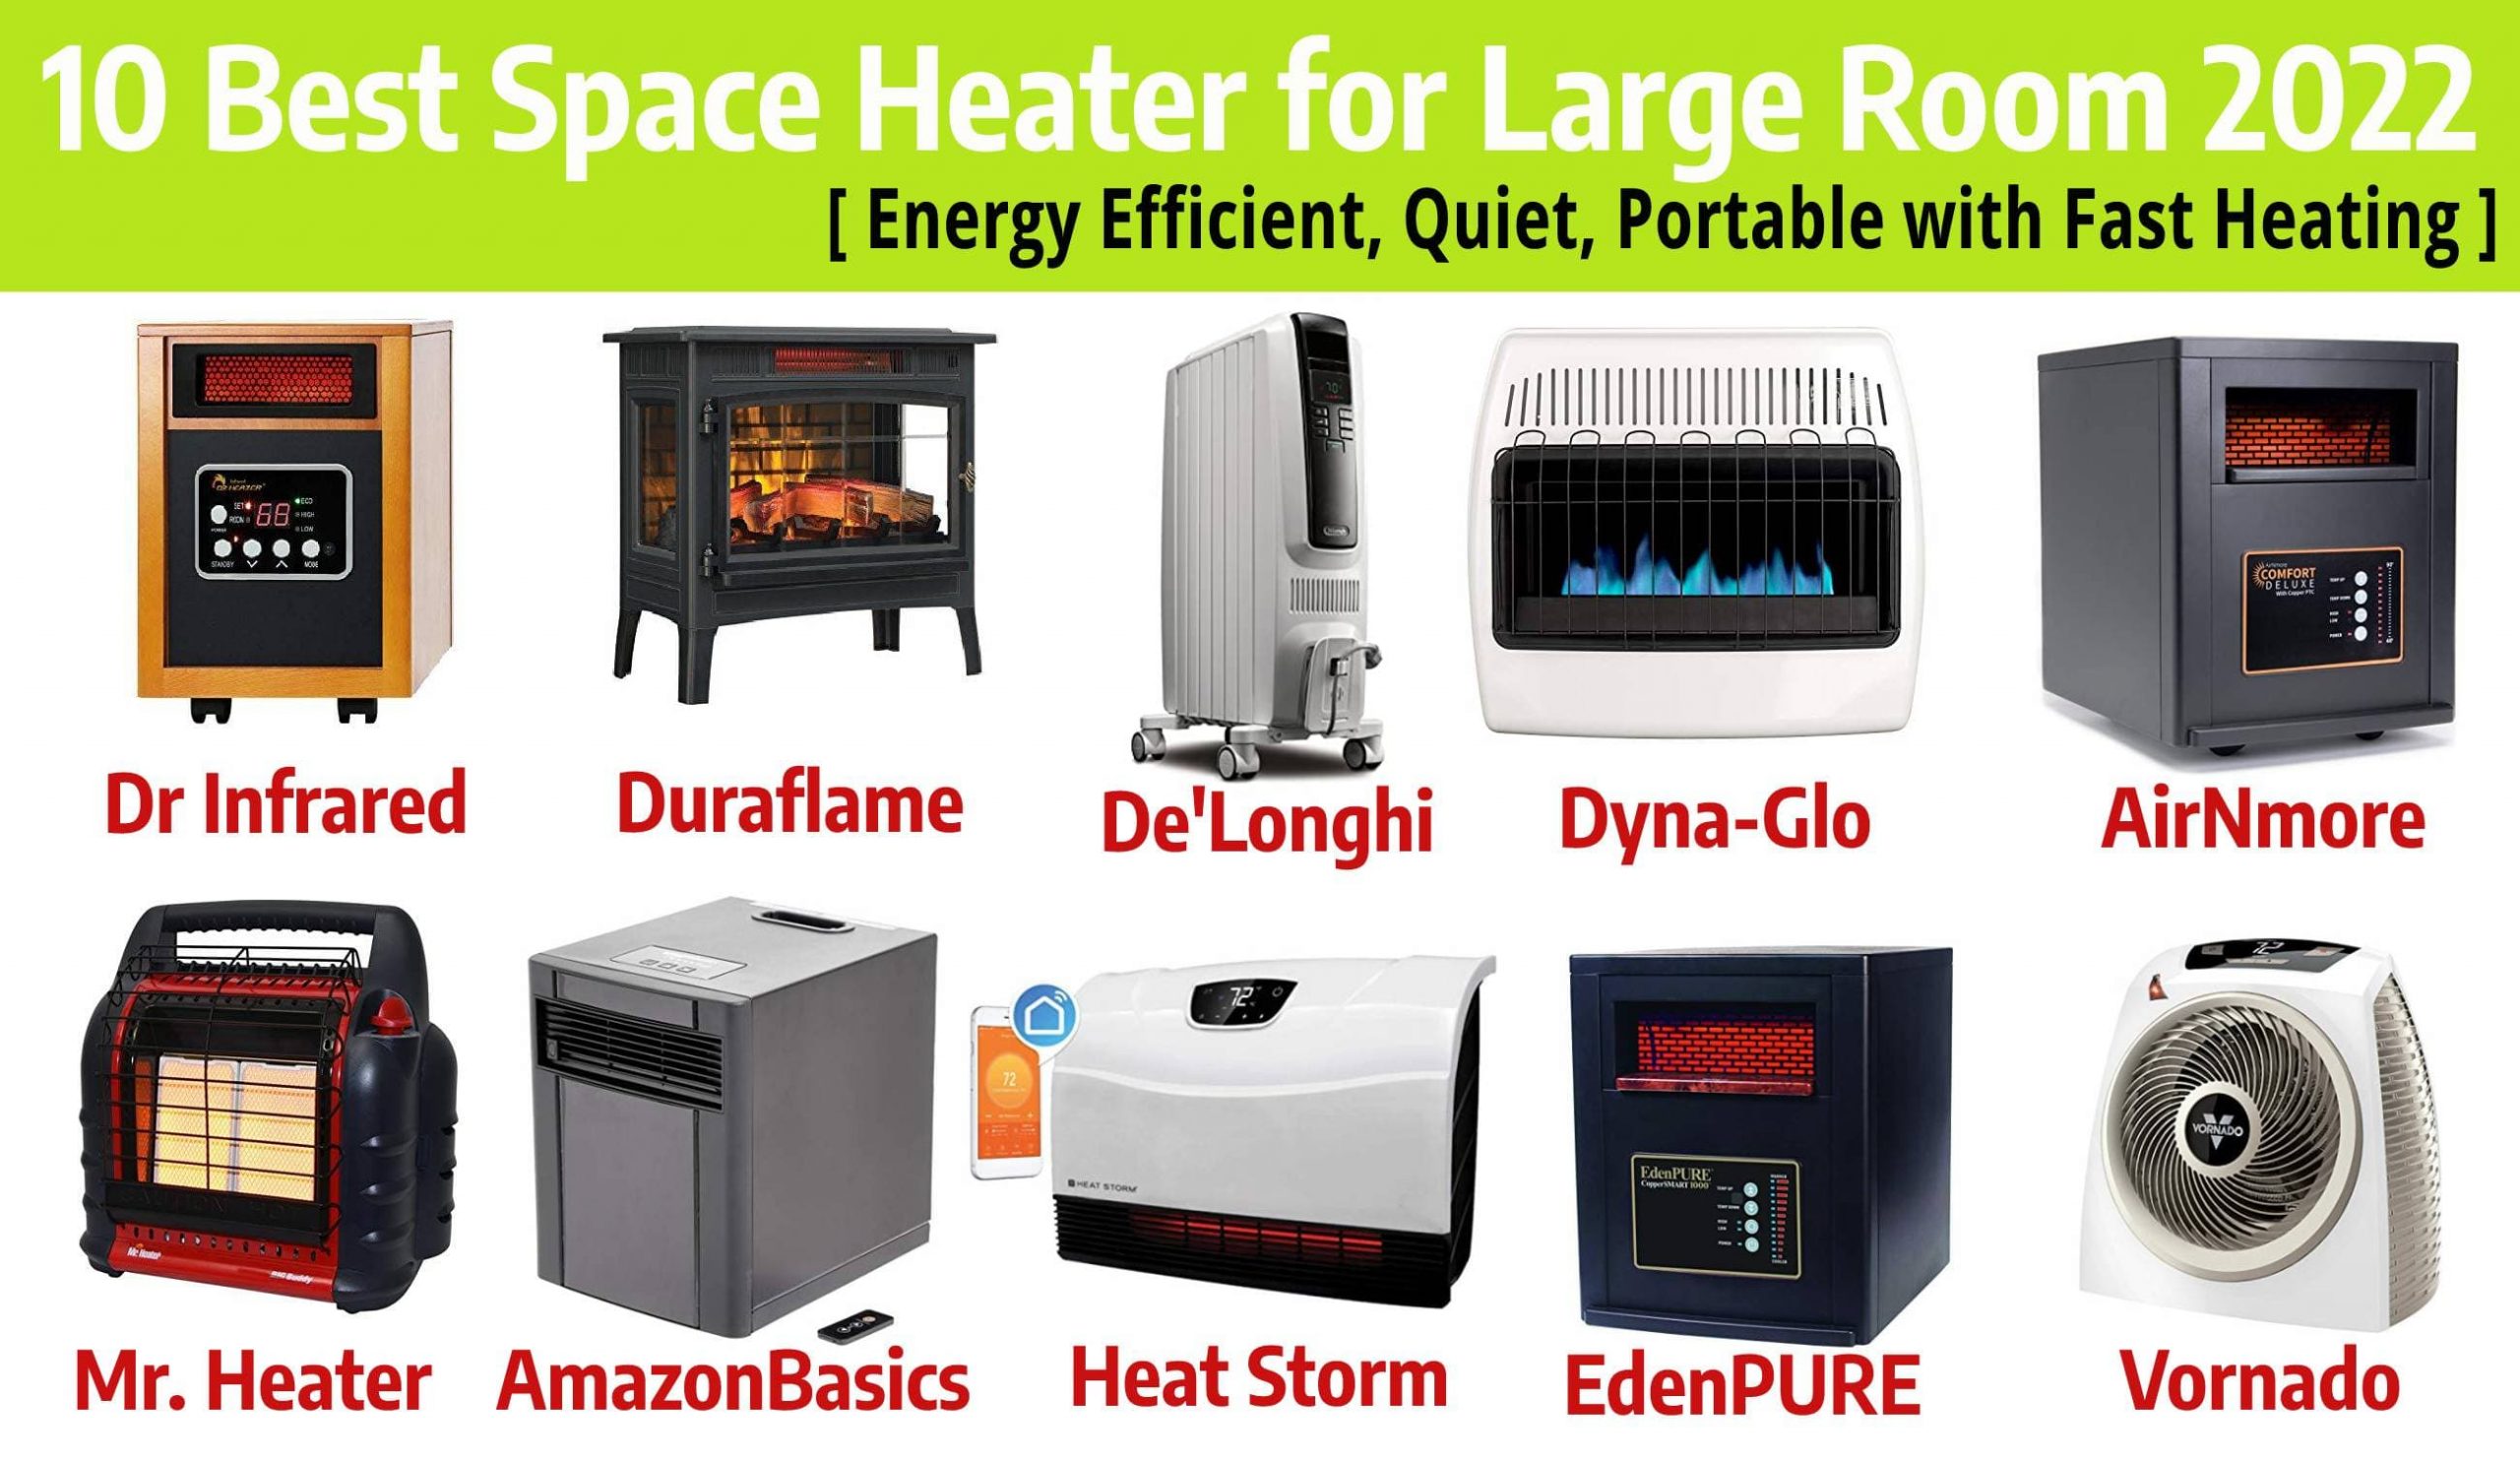 Best Space Heater for Large Room 2022 Review: High Energy Efficient & Quiet, Portable Heater with Fast Heating for Winter - Compared Dr Infrared vs Duraflame vs Infrared Heater vs De'Longhi vs Taotronics vs AmazonBasics vs Vornado vs Heat Storm vs AirNmore.